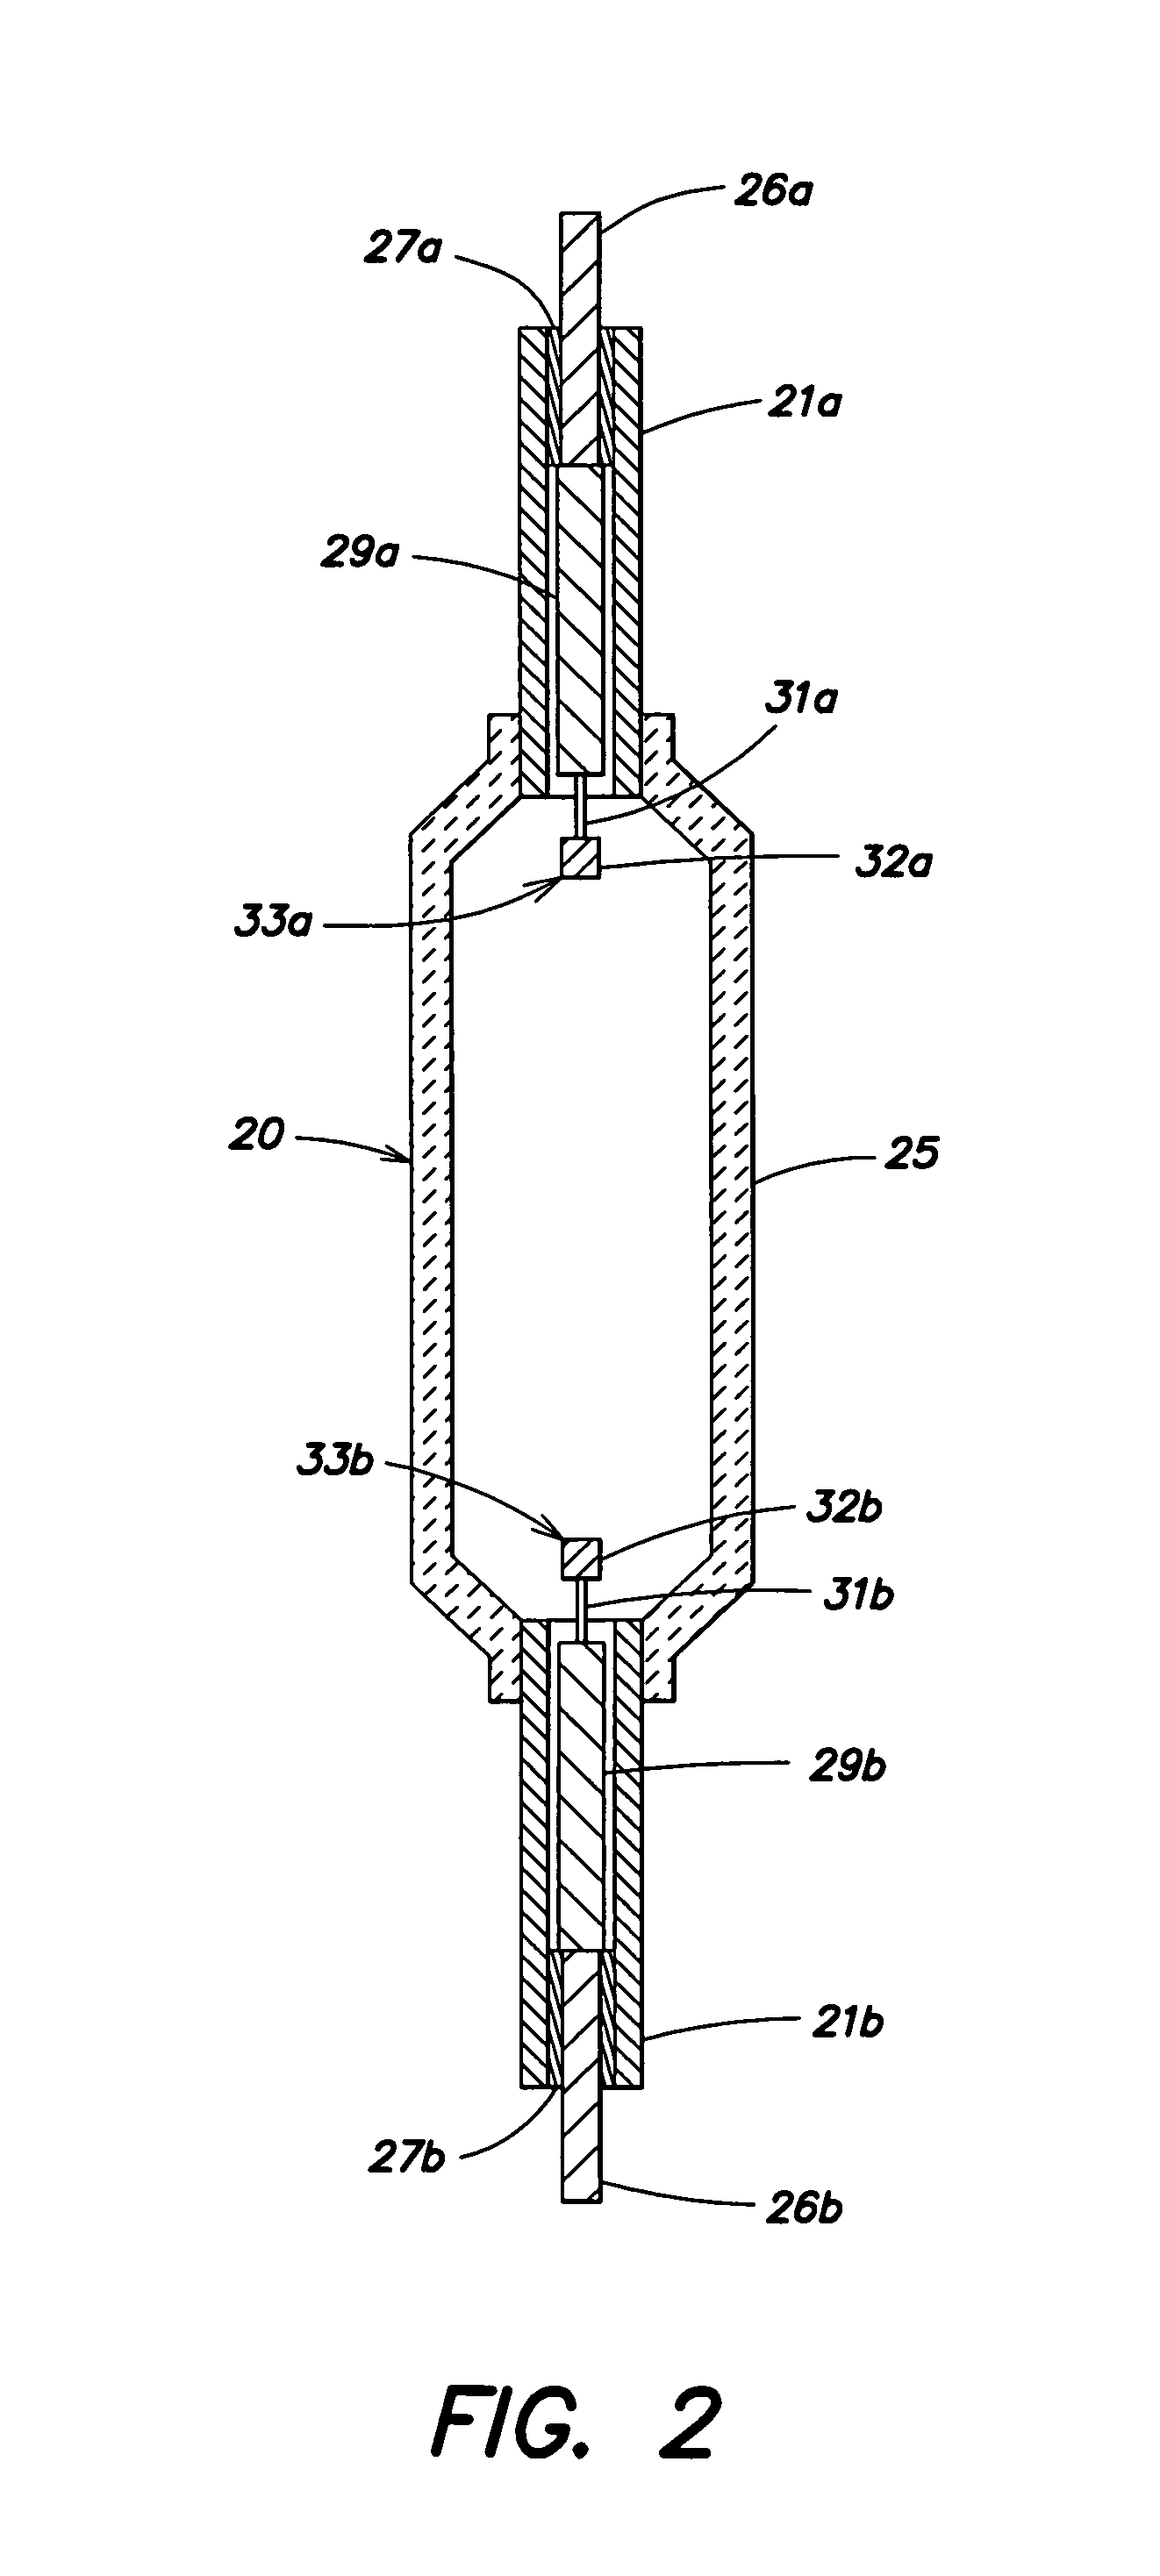 High intensity discharge lamps with electronic control of dimming